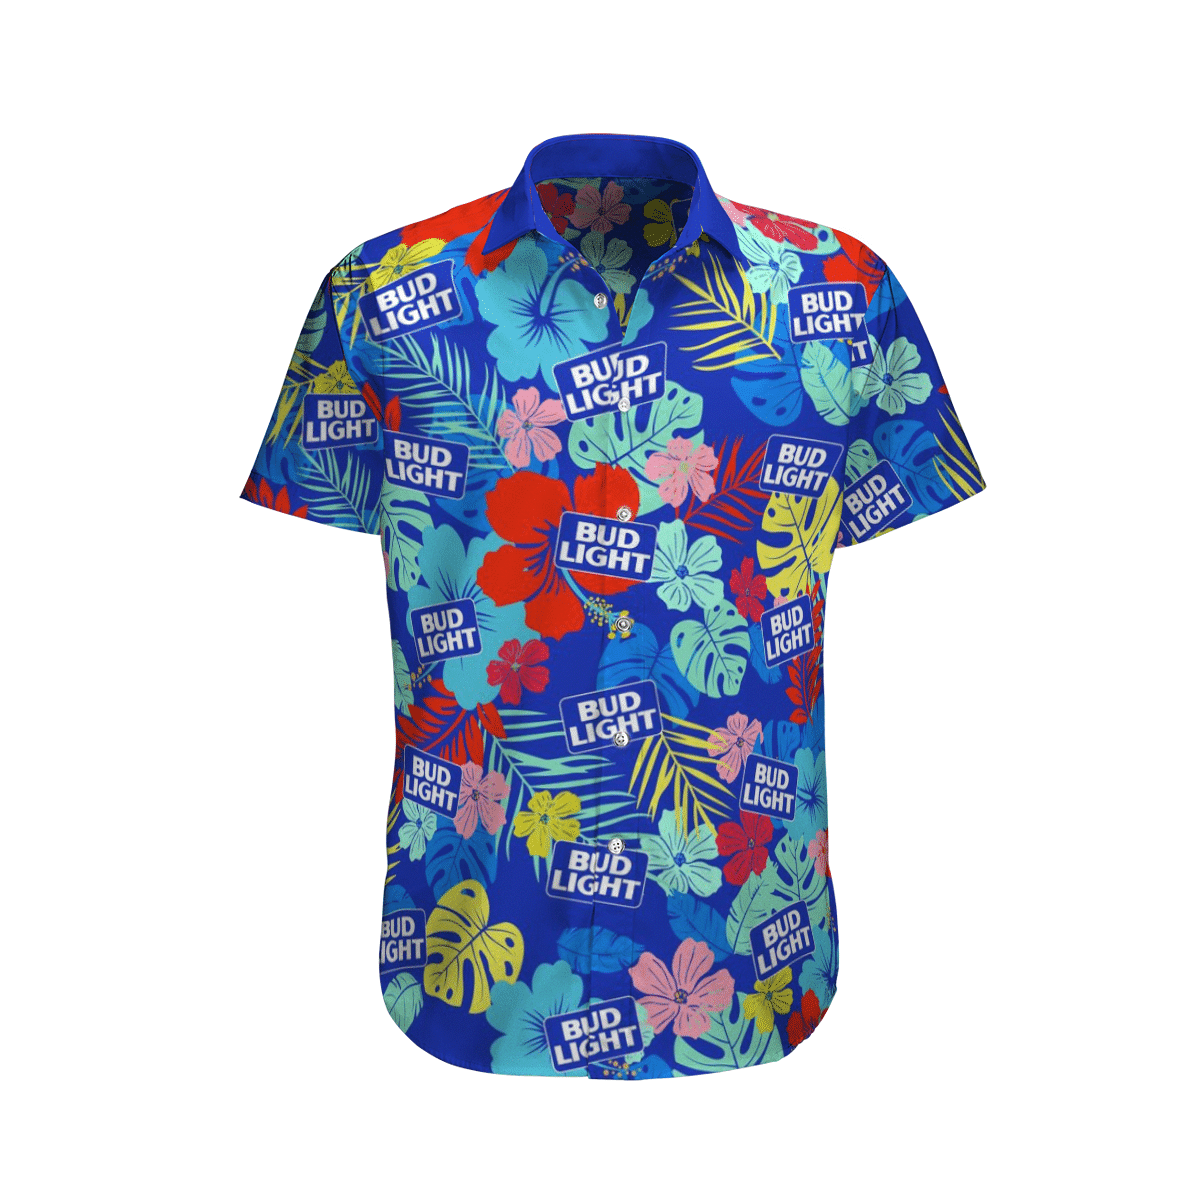 Top cool Hawaiian shirt 2022 - Make sure you get yours today before they run out! 2